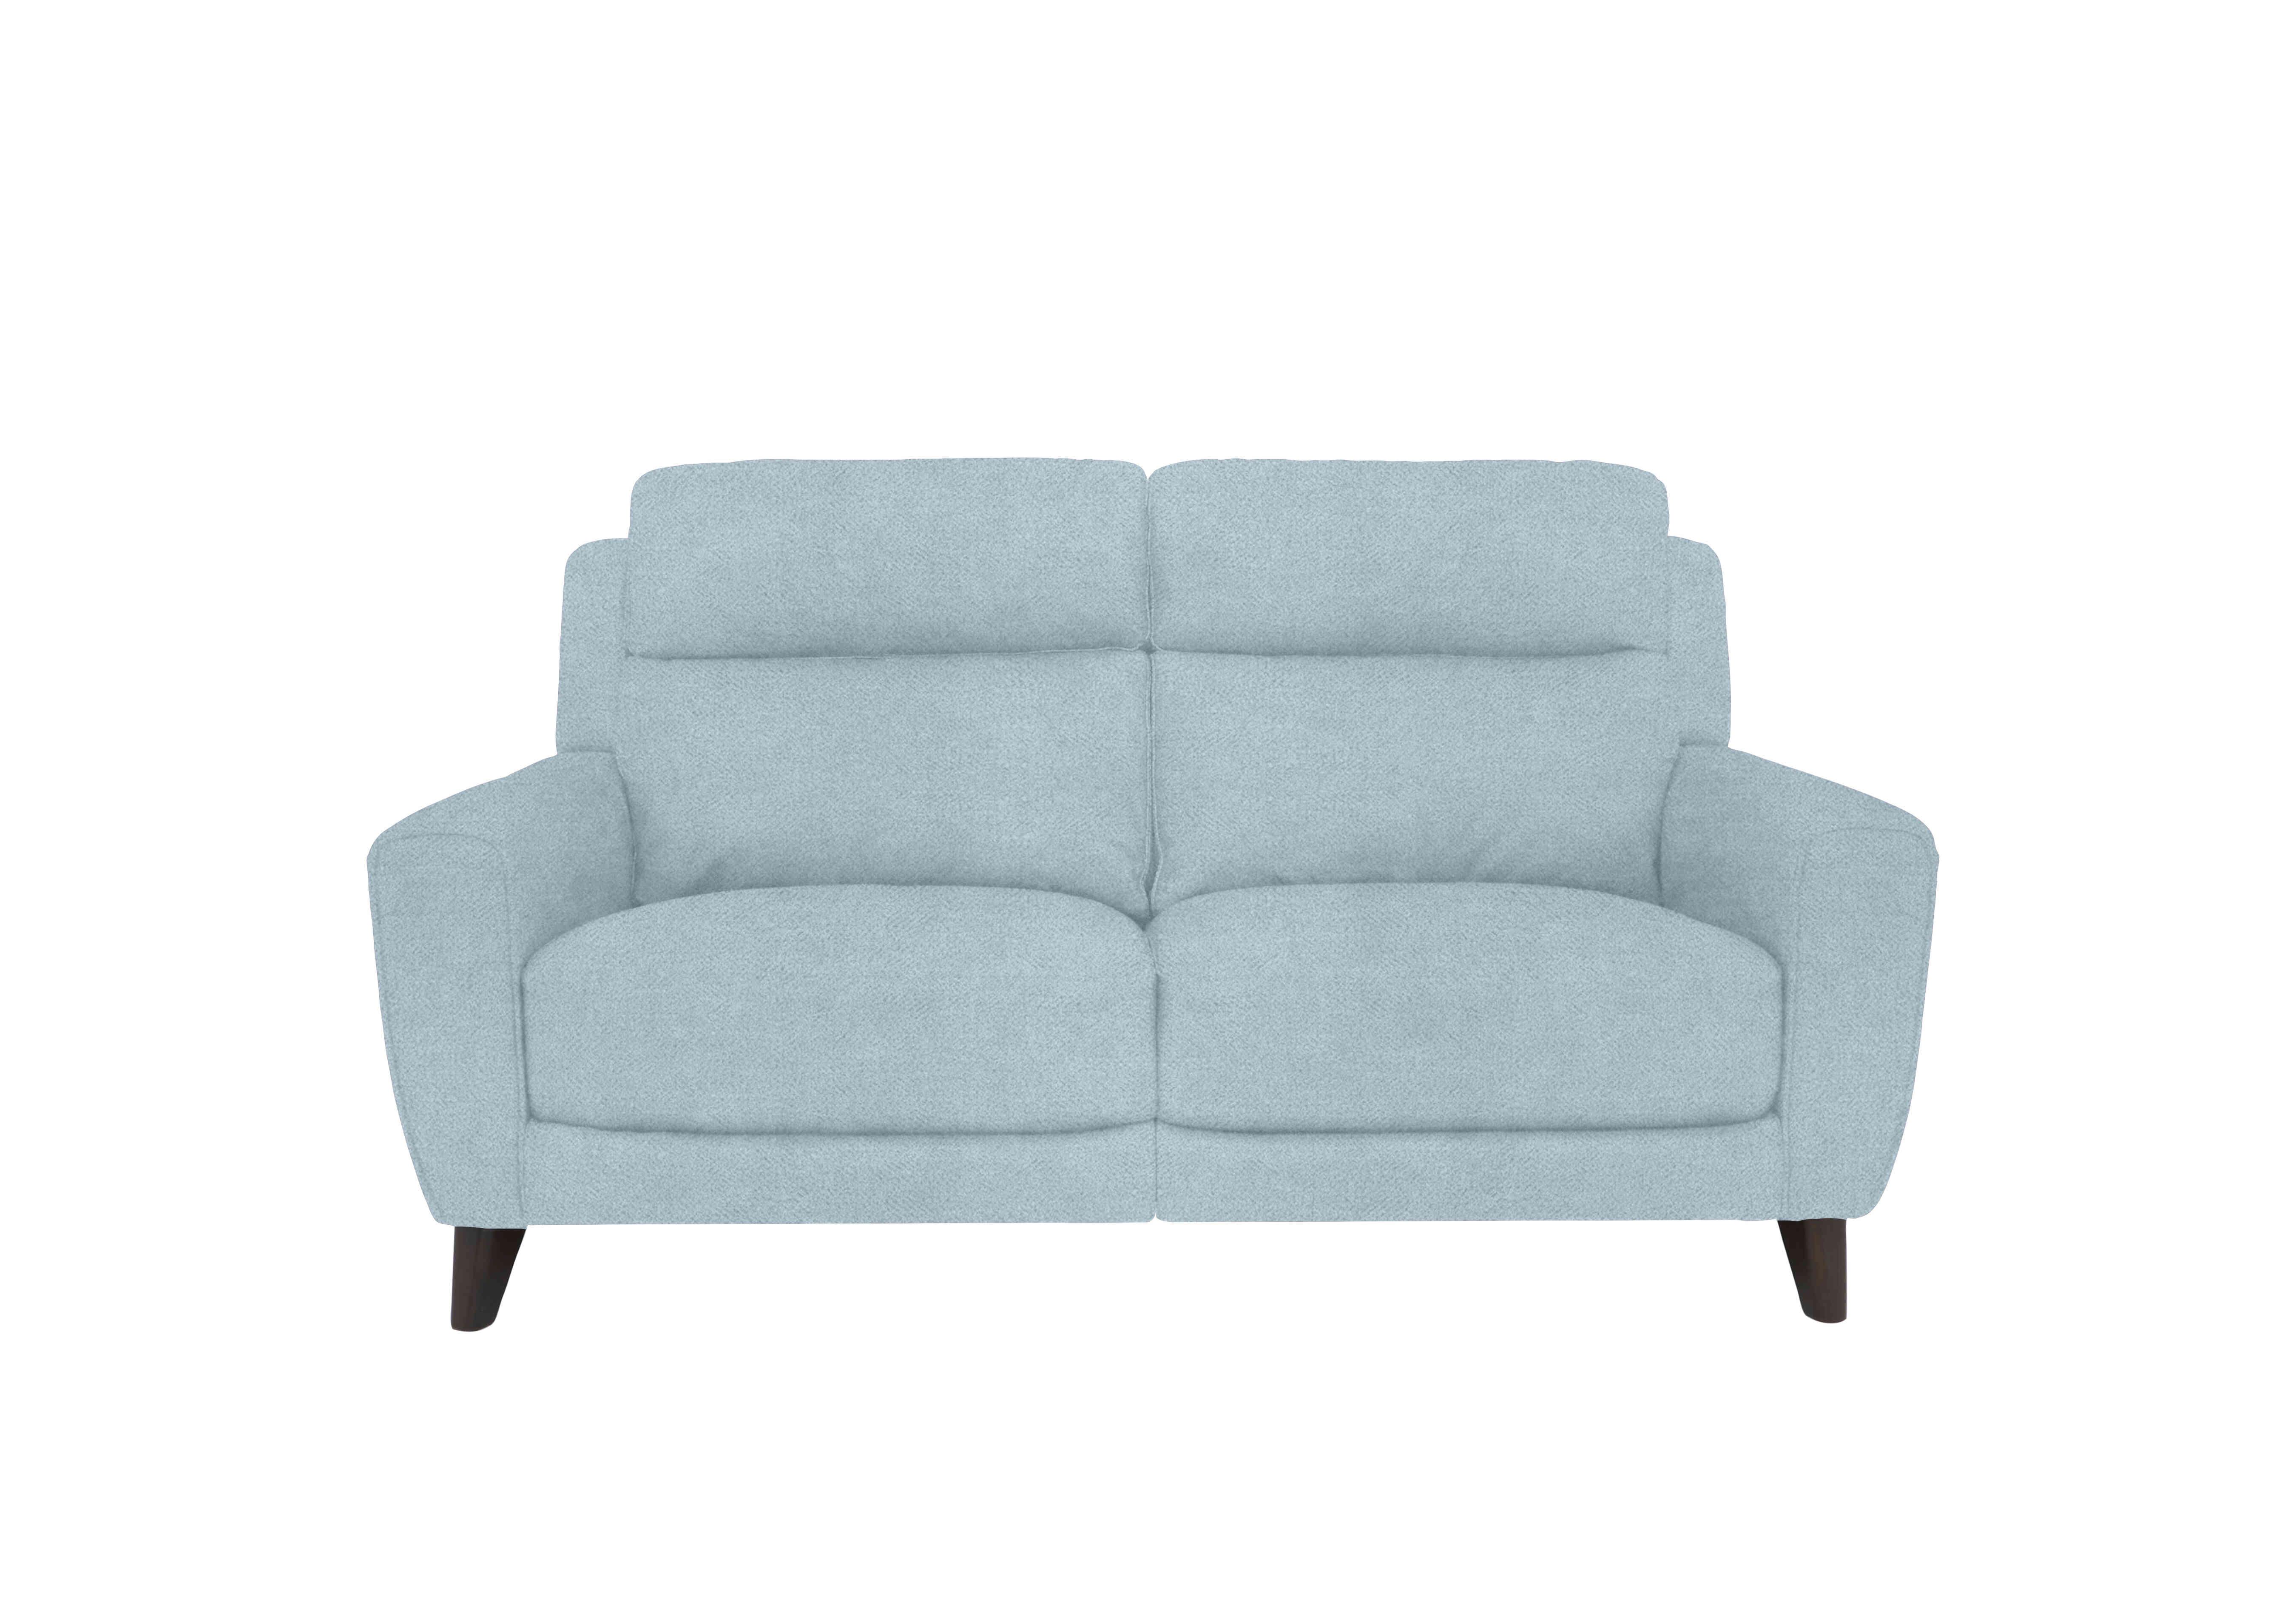 Zen 2 Seater Fabric Power Recliner Sofa with Power Headrests in Fab-Meo-R17 Baby Blue on Furniture Village